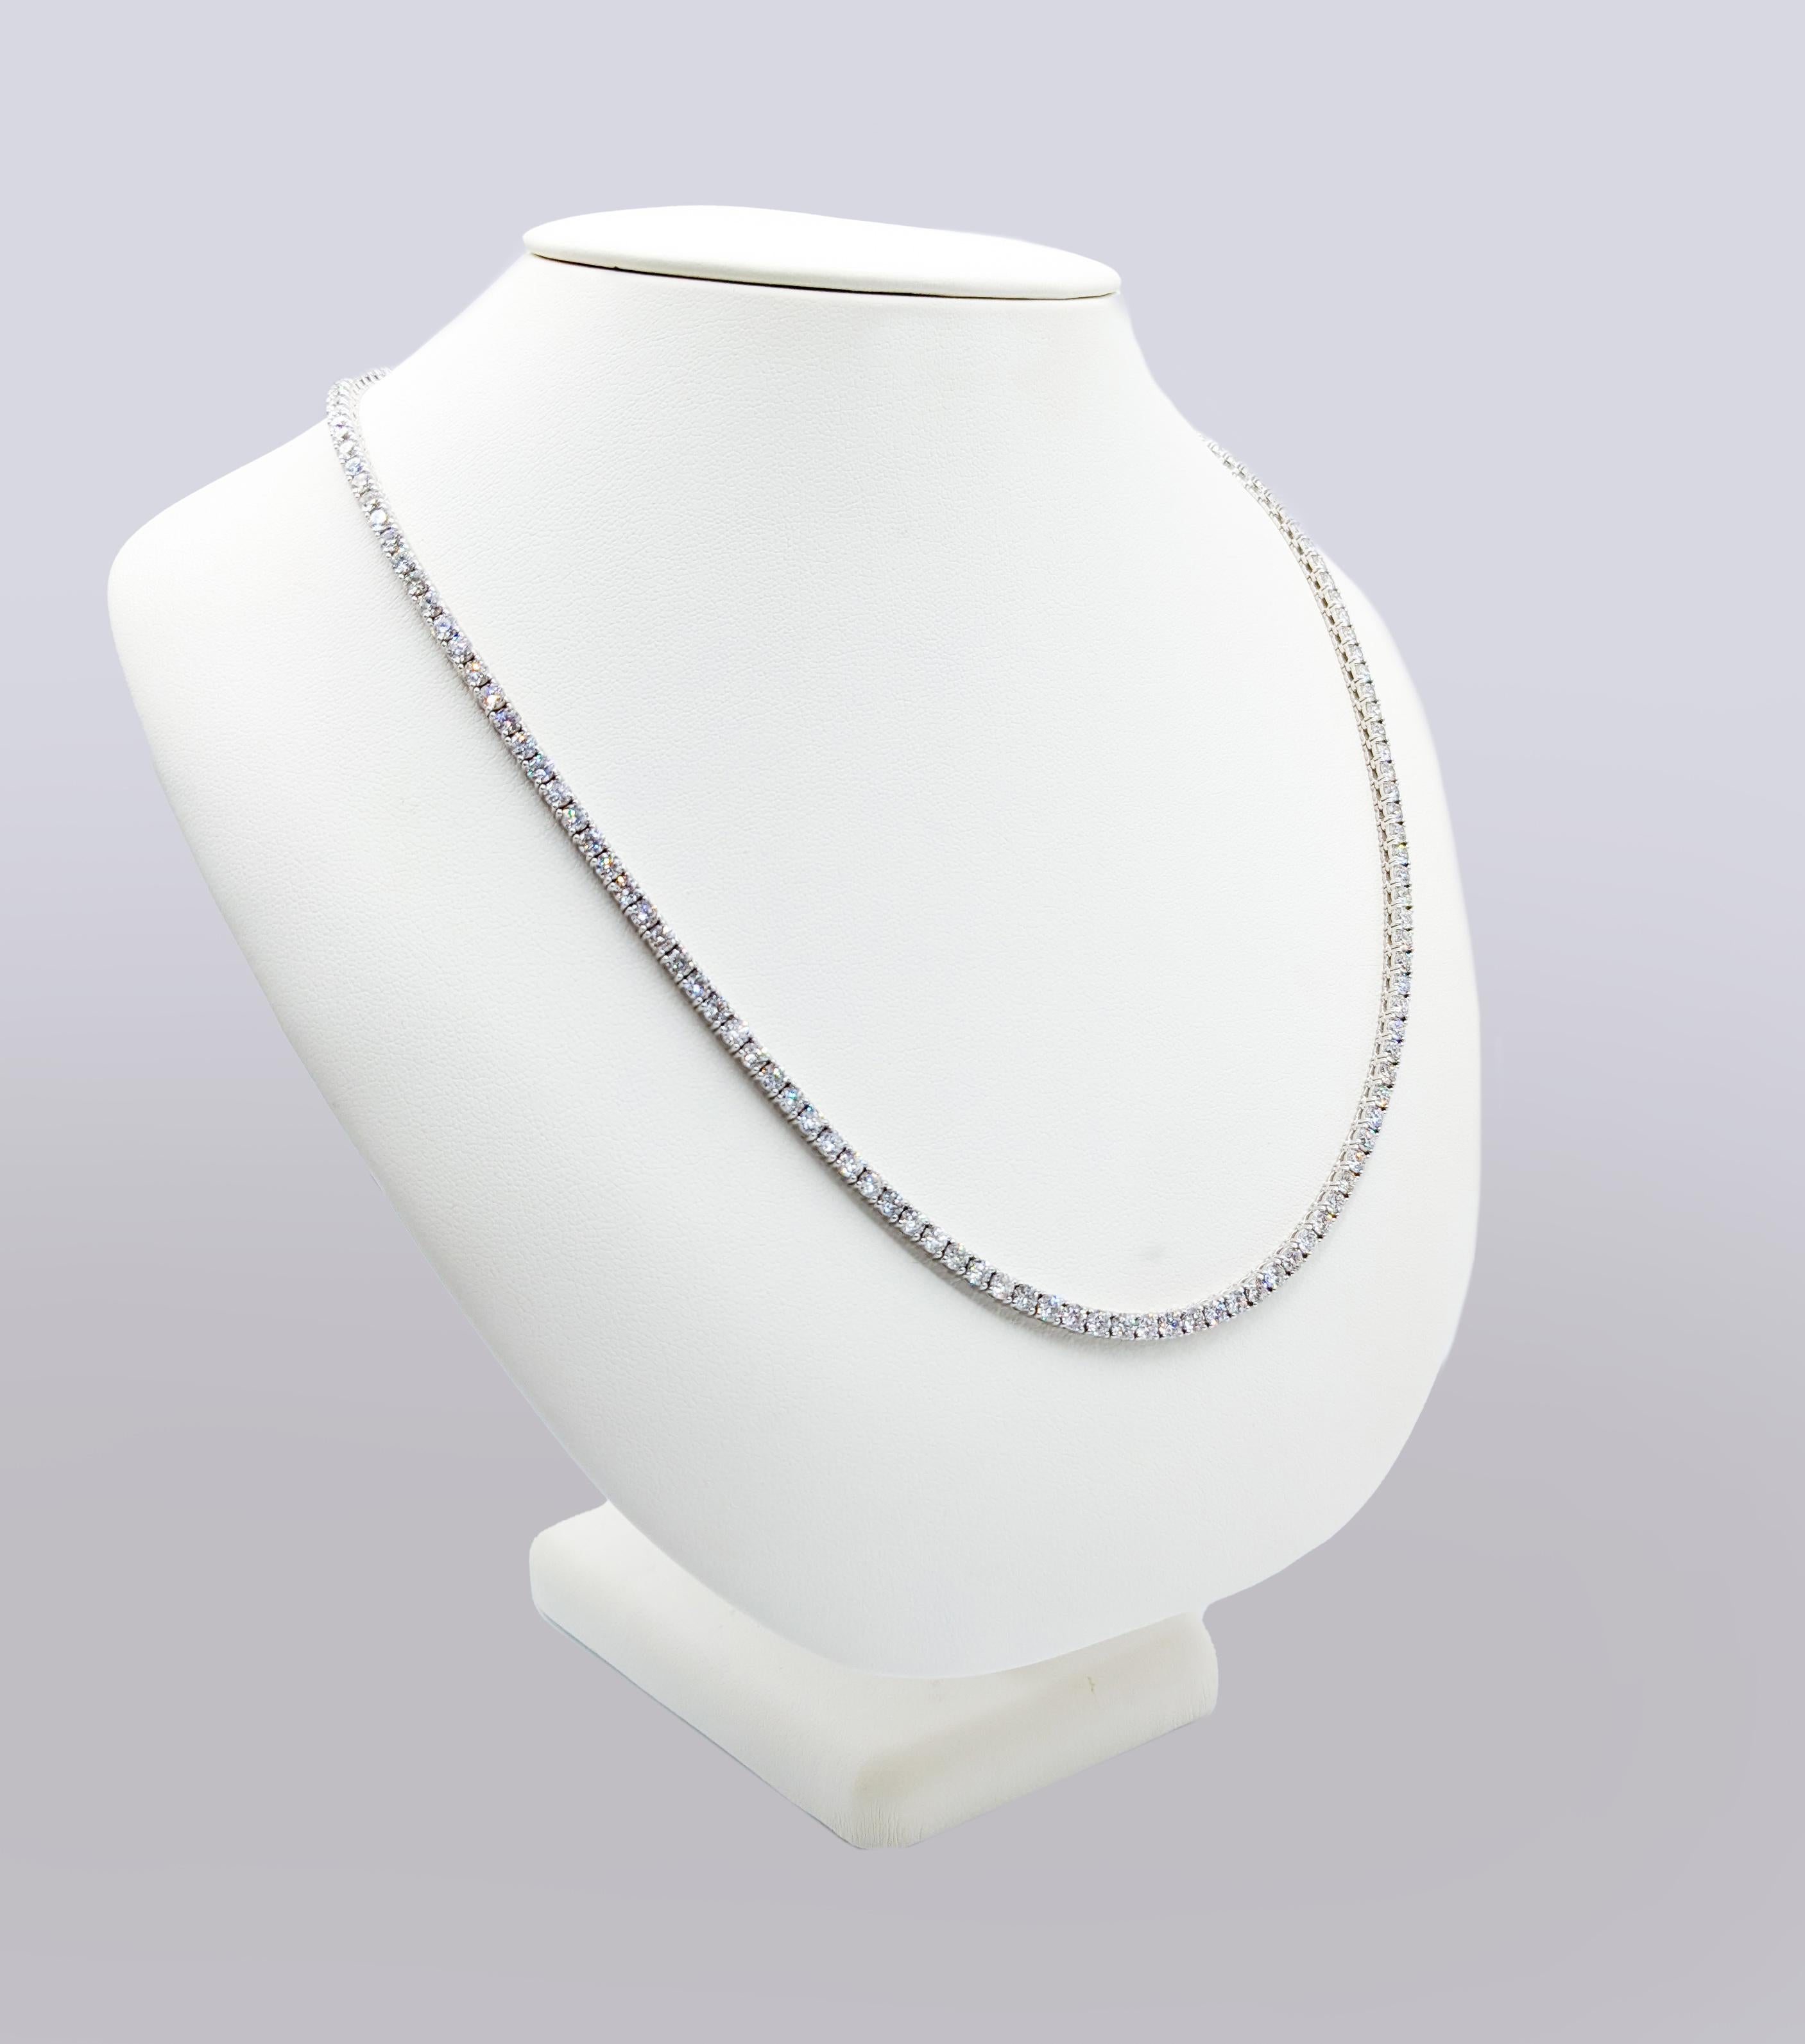 Beautiful 16.88ctw Natural Diamond Tennis Necklace in 14Kt White Gold

This beautiful tennis necklace is meticulously crafted from 14kt white gold. It proudly showcases a continuous line of radiant diamonds totaling 16.88ctw. Each diamond sparkles